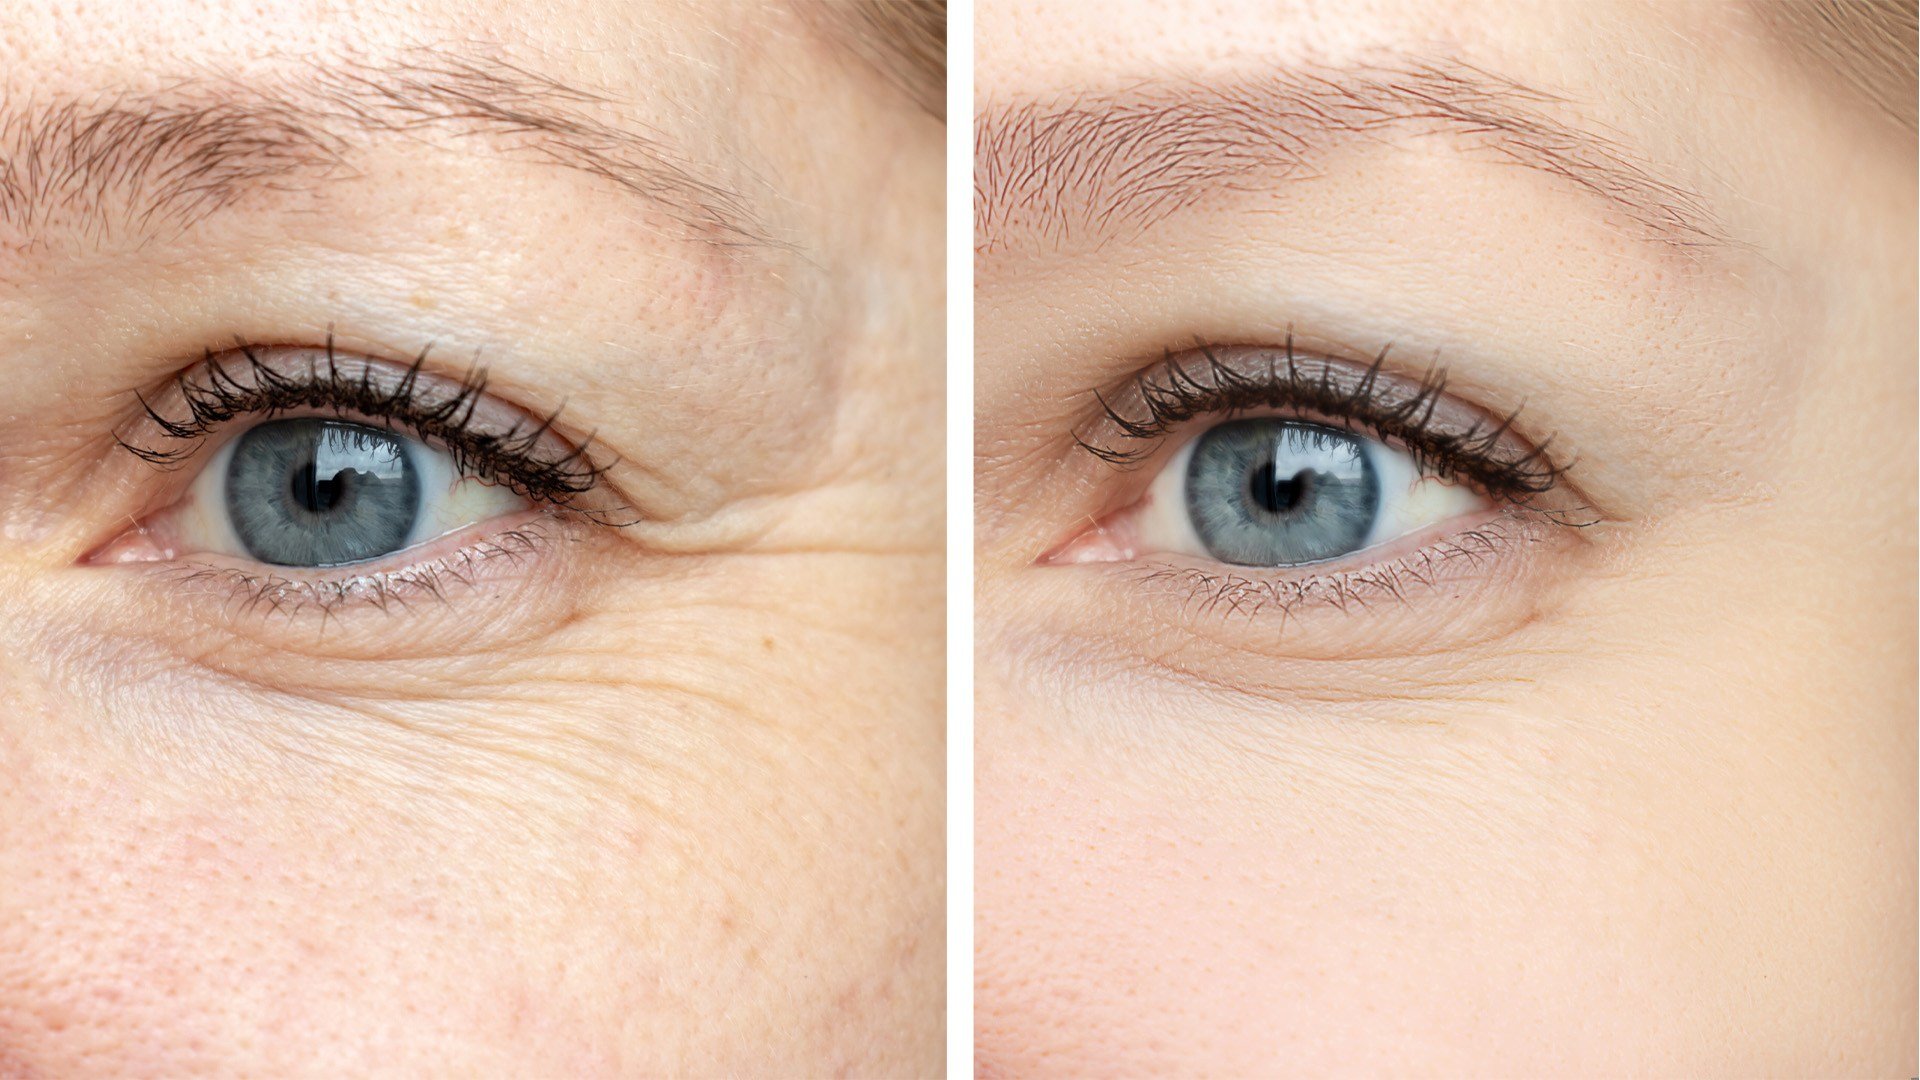 Loreal Paris Article How To Manage Under Eye Wrinkles And Lines D